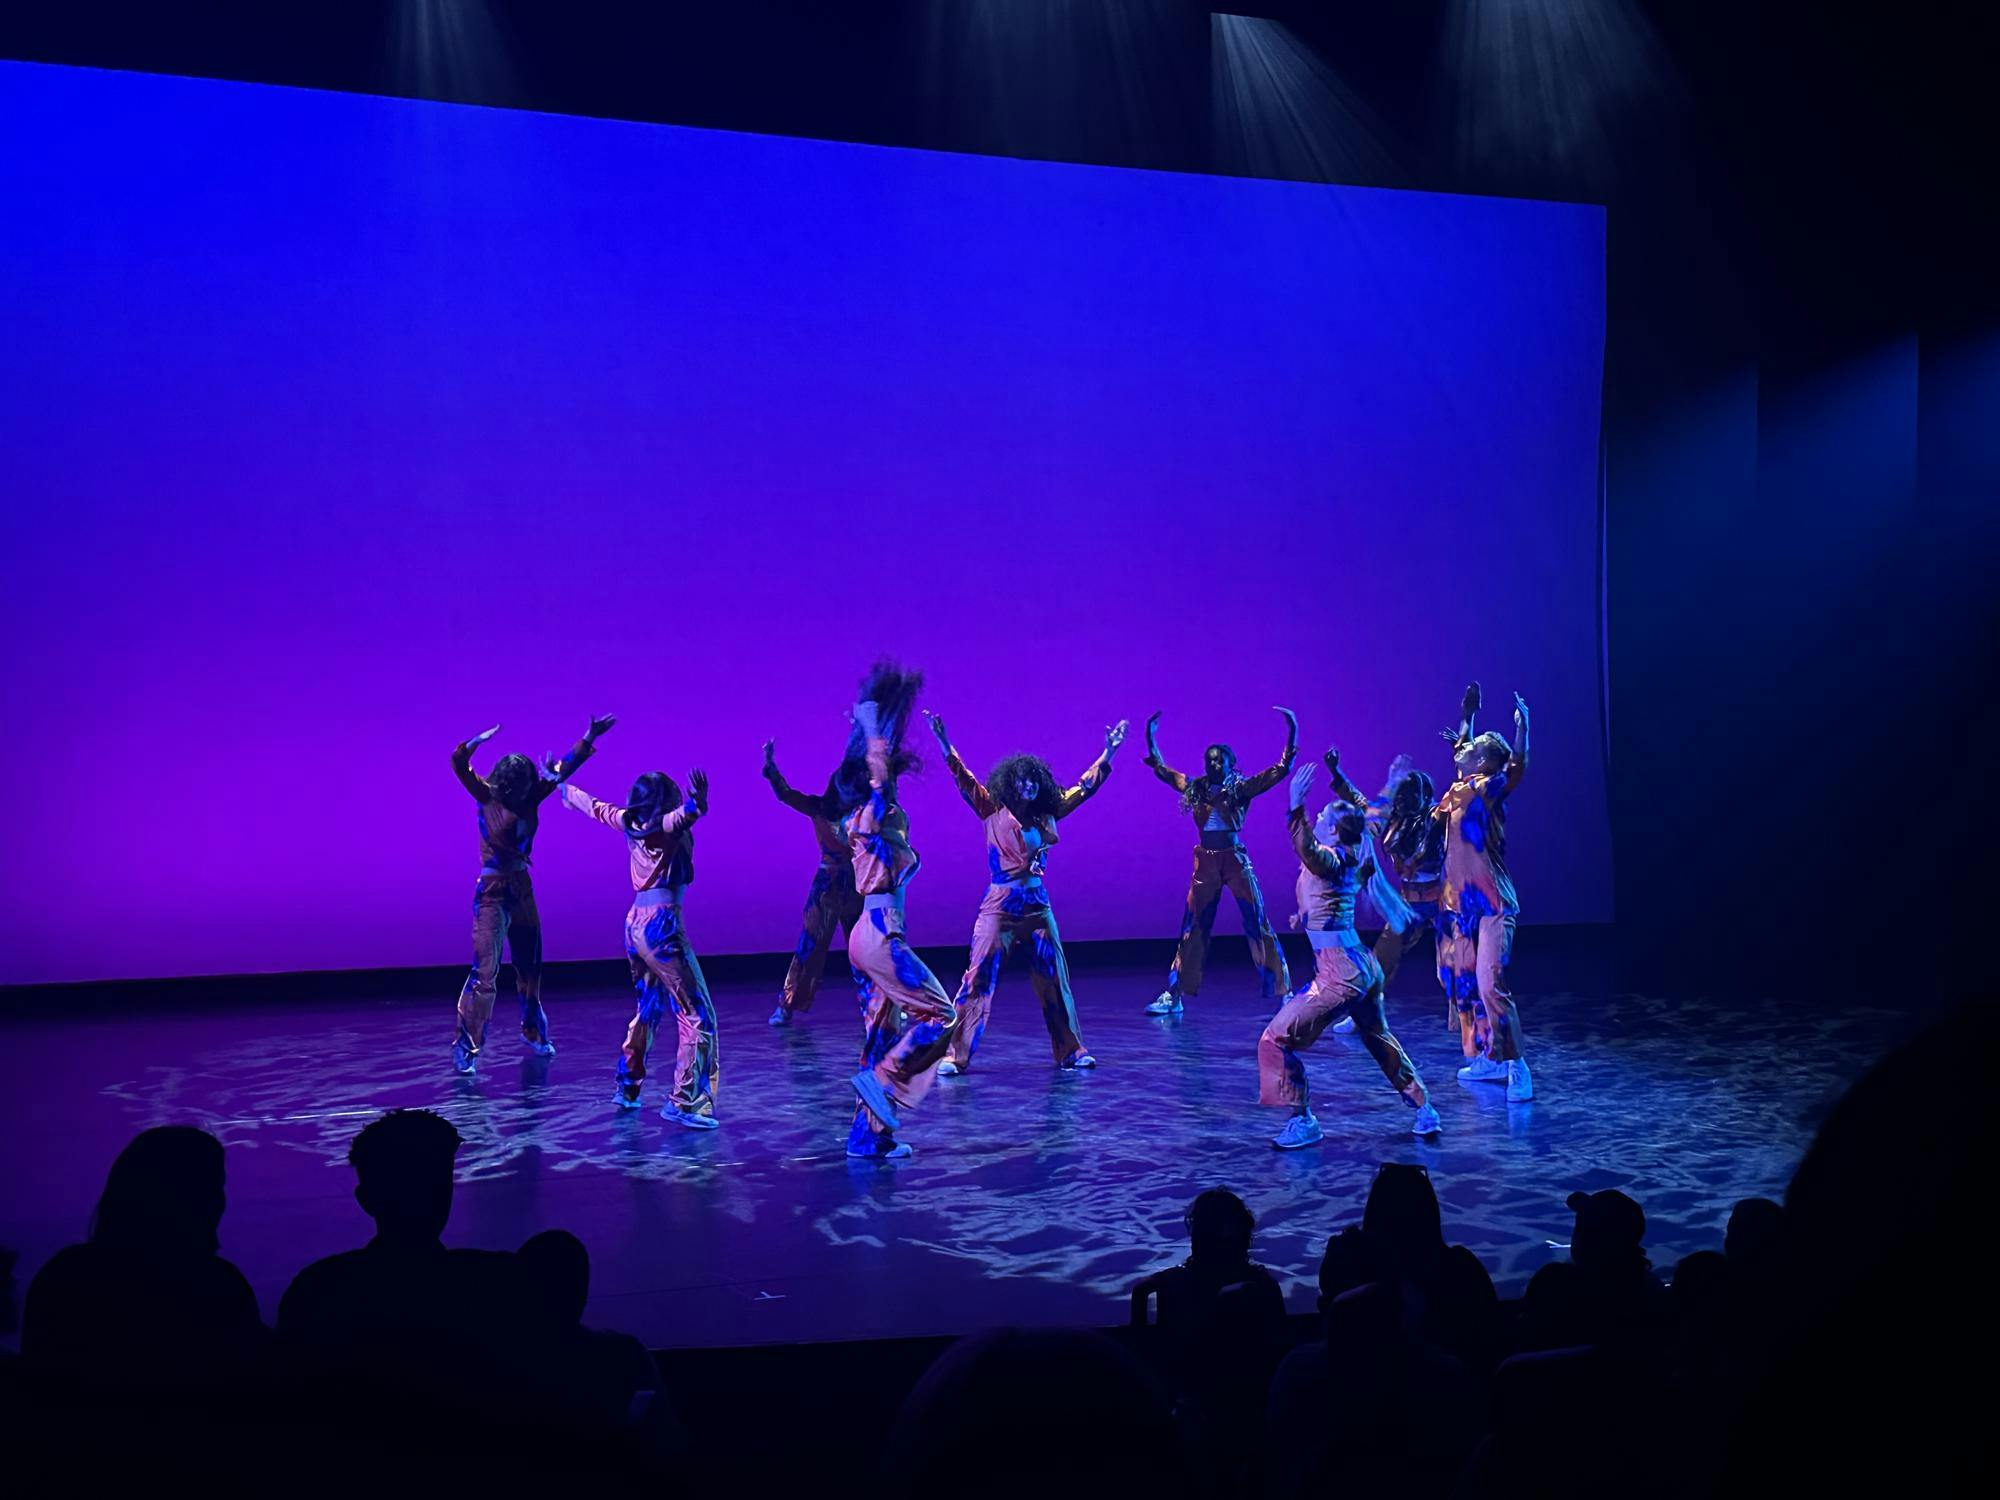 Dancers mid-movement gather in a circle on a black stage illuminated by purple lighting.